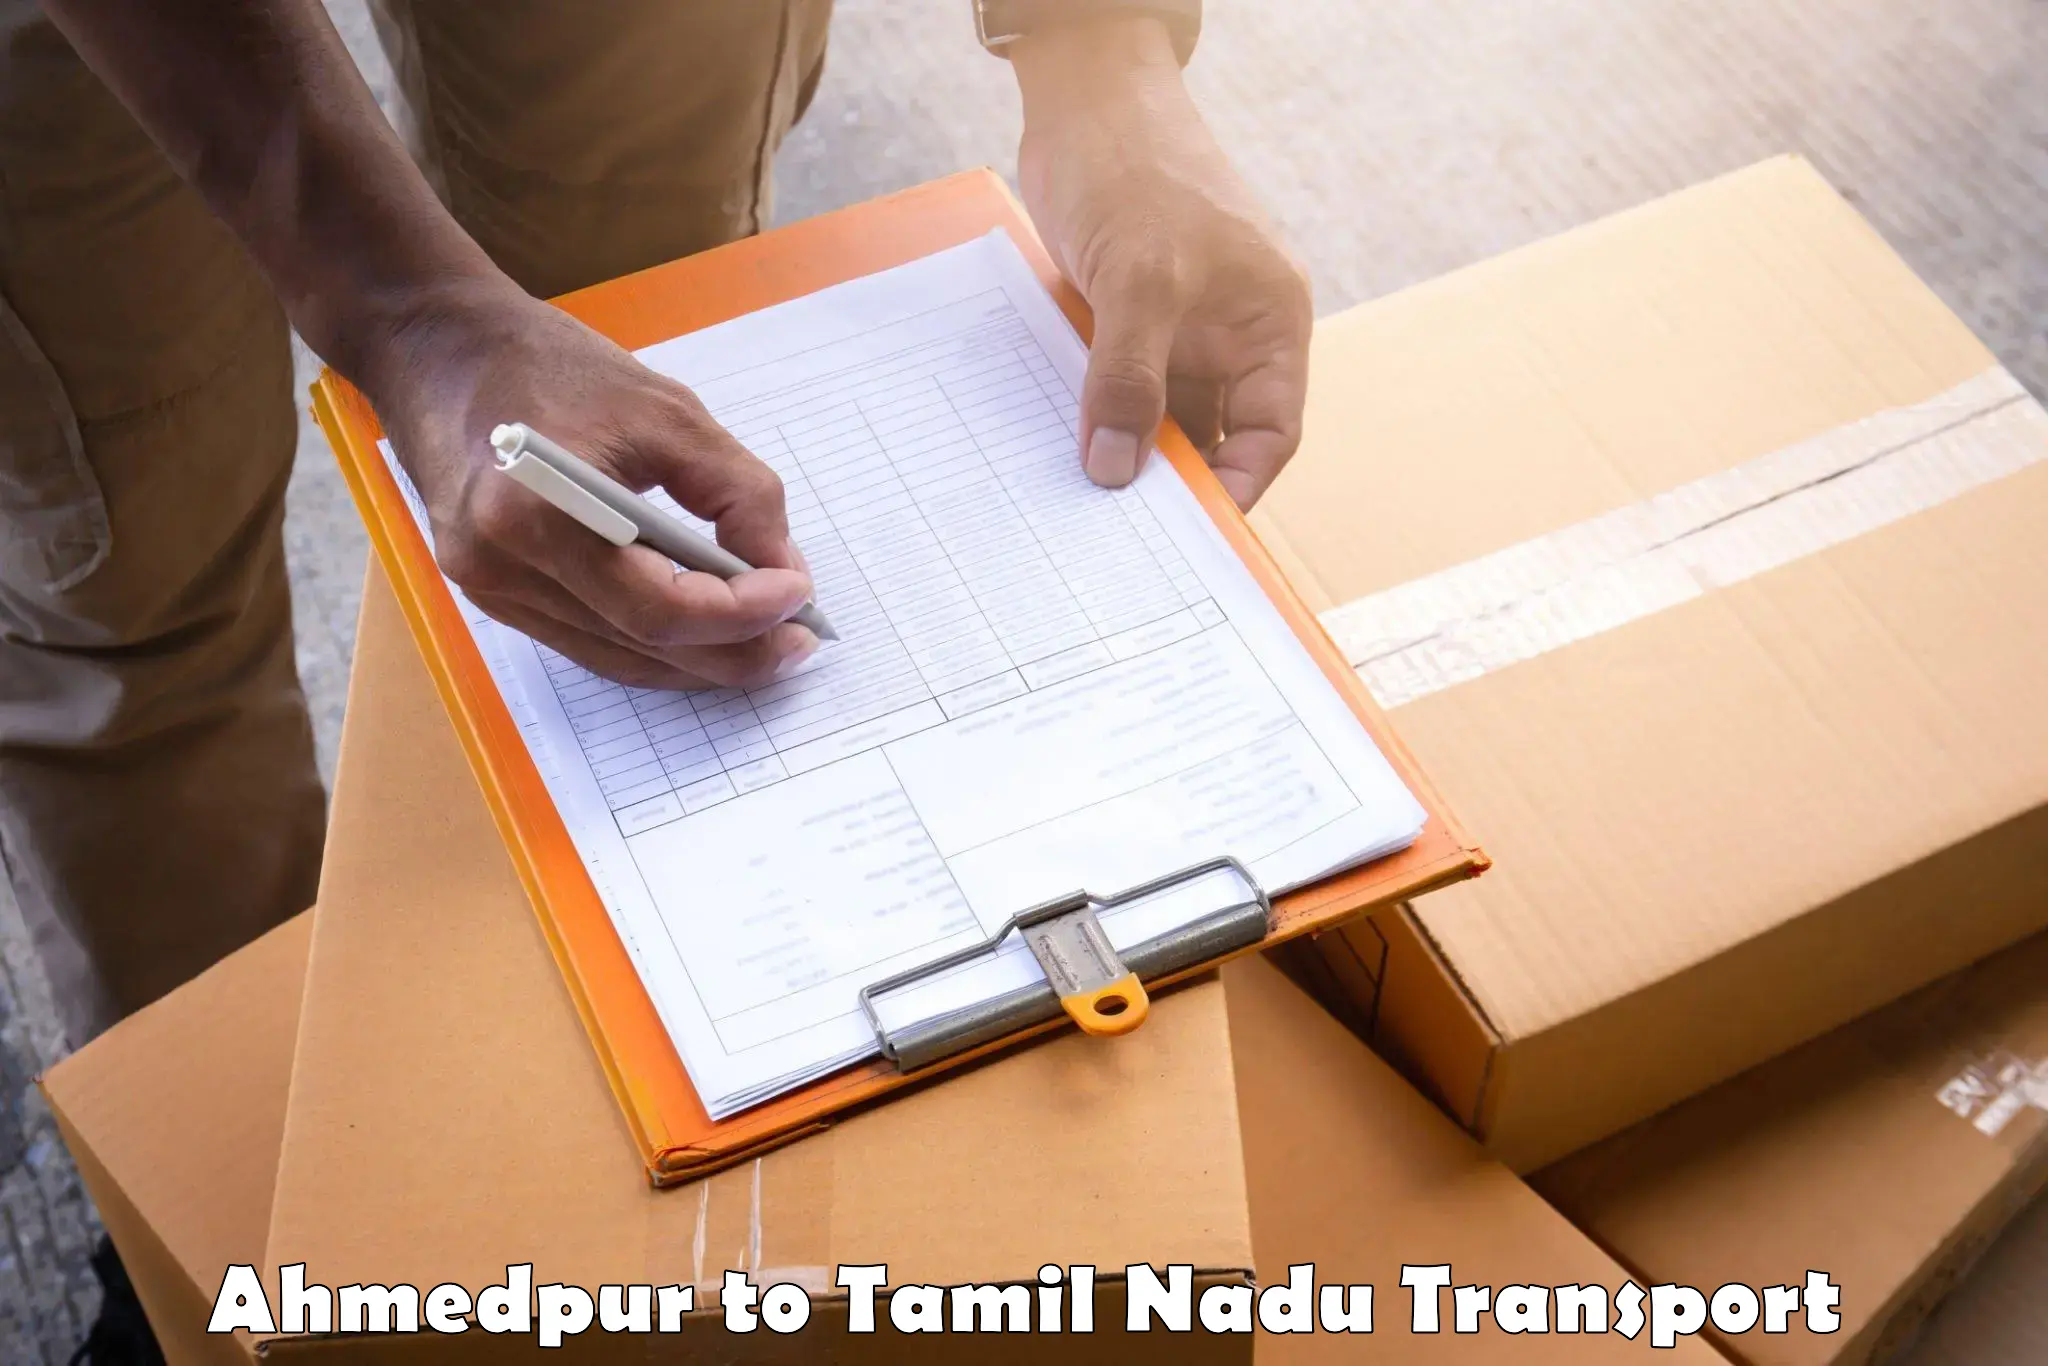 Commercial transport service in Ahmedpur to Sriperumbudur